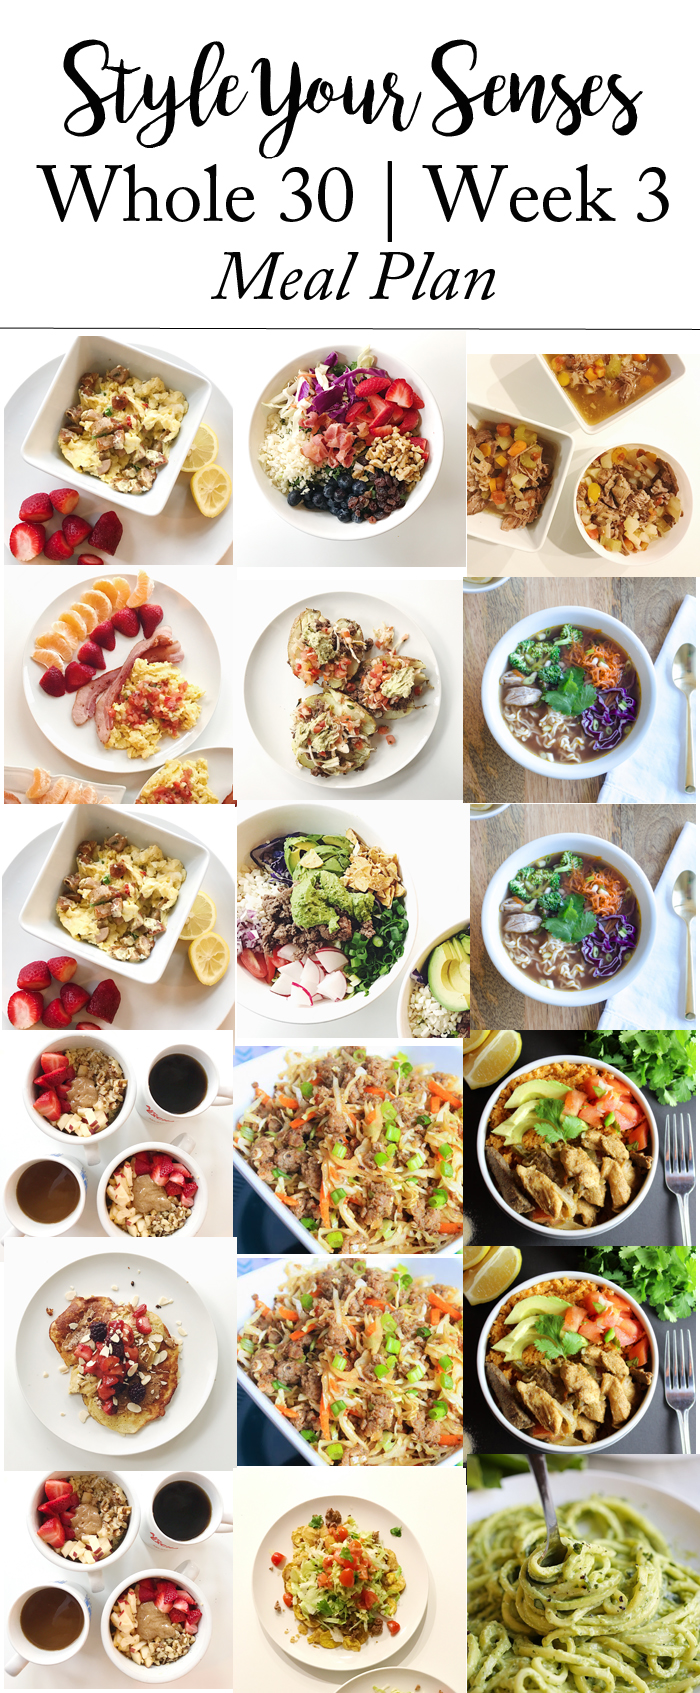 Whole 30 Week 3 meal plan featured by popular Texas lifestyle blogger, Style Your Senses